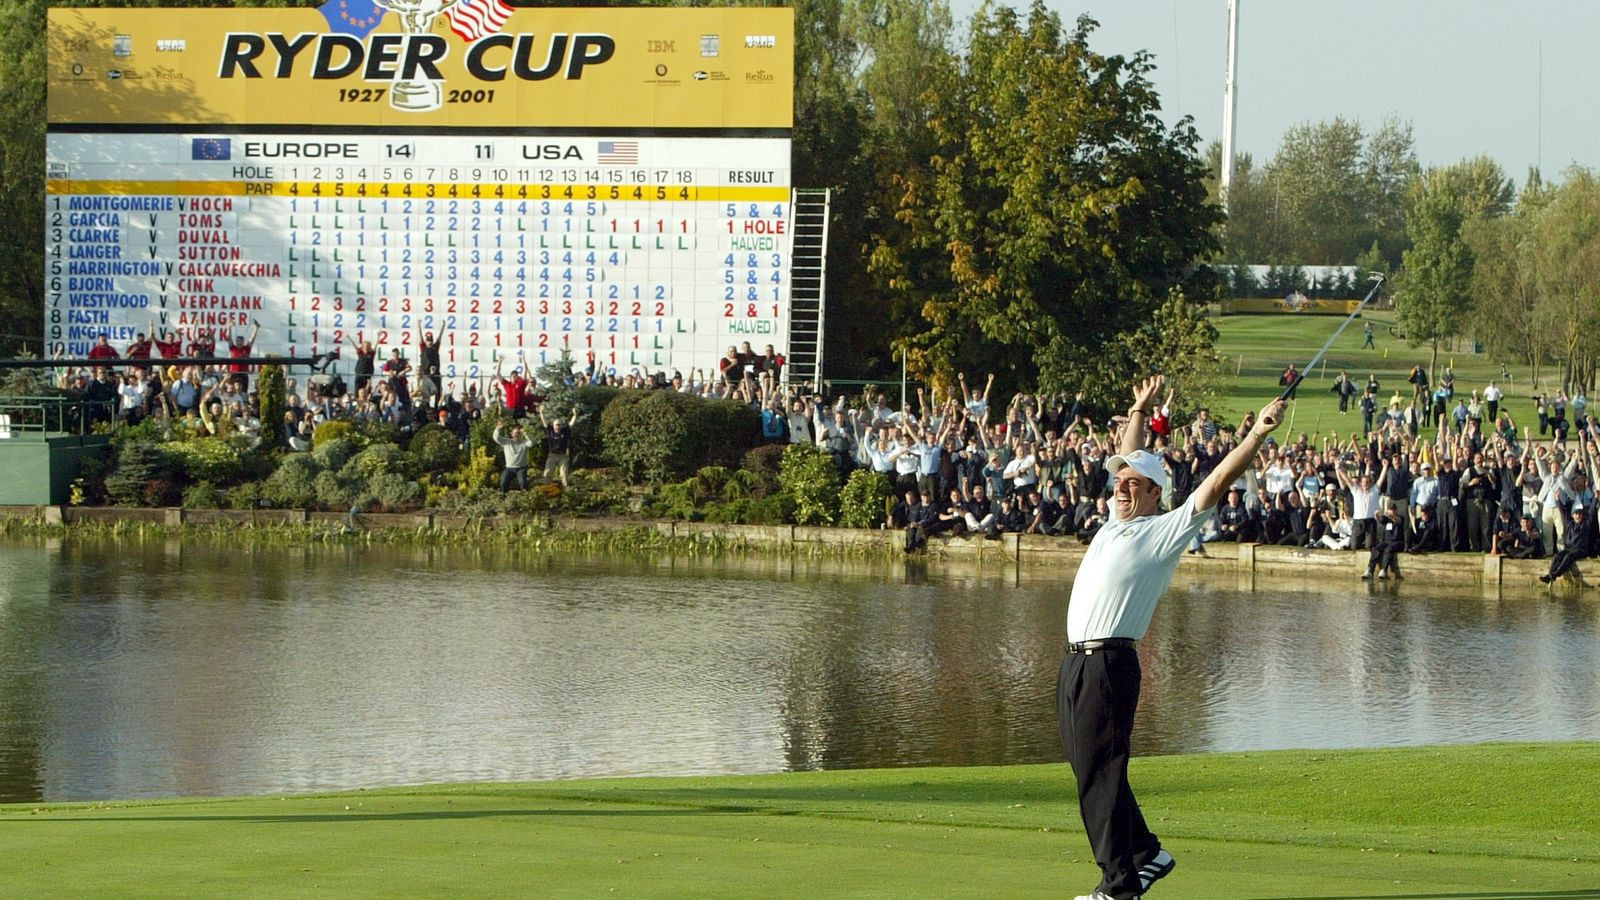 During Sandy Jones' period as PGA chief executive, Britain successfully hosted the Ryder Cup on a number of occasions, including at the Belfry in 2002 ©Getty Images